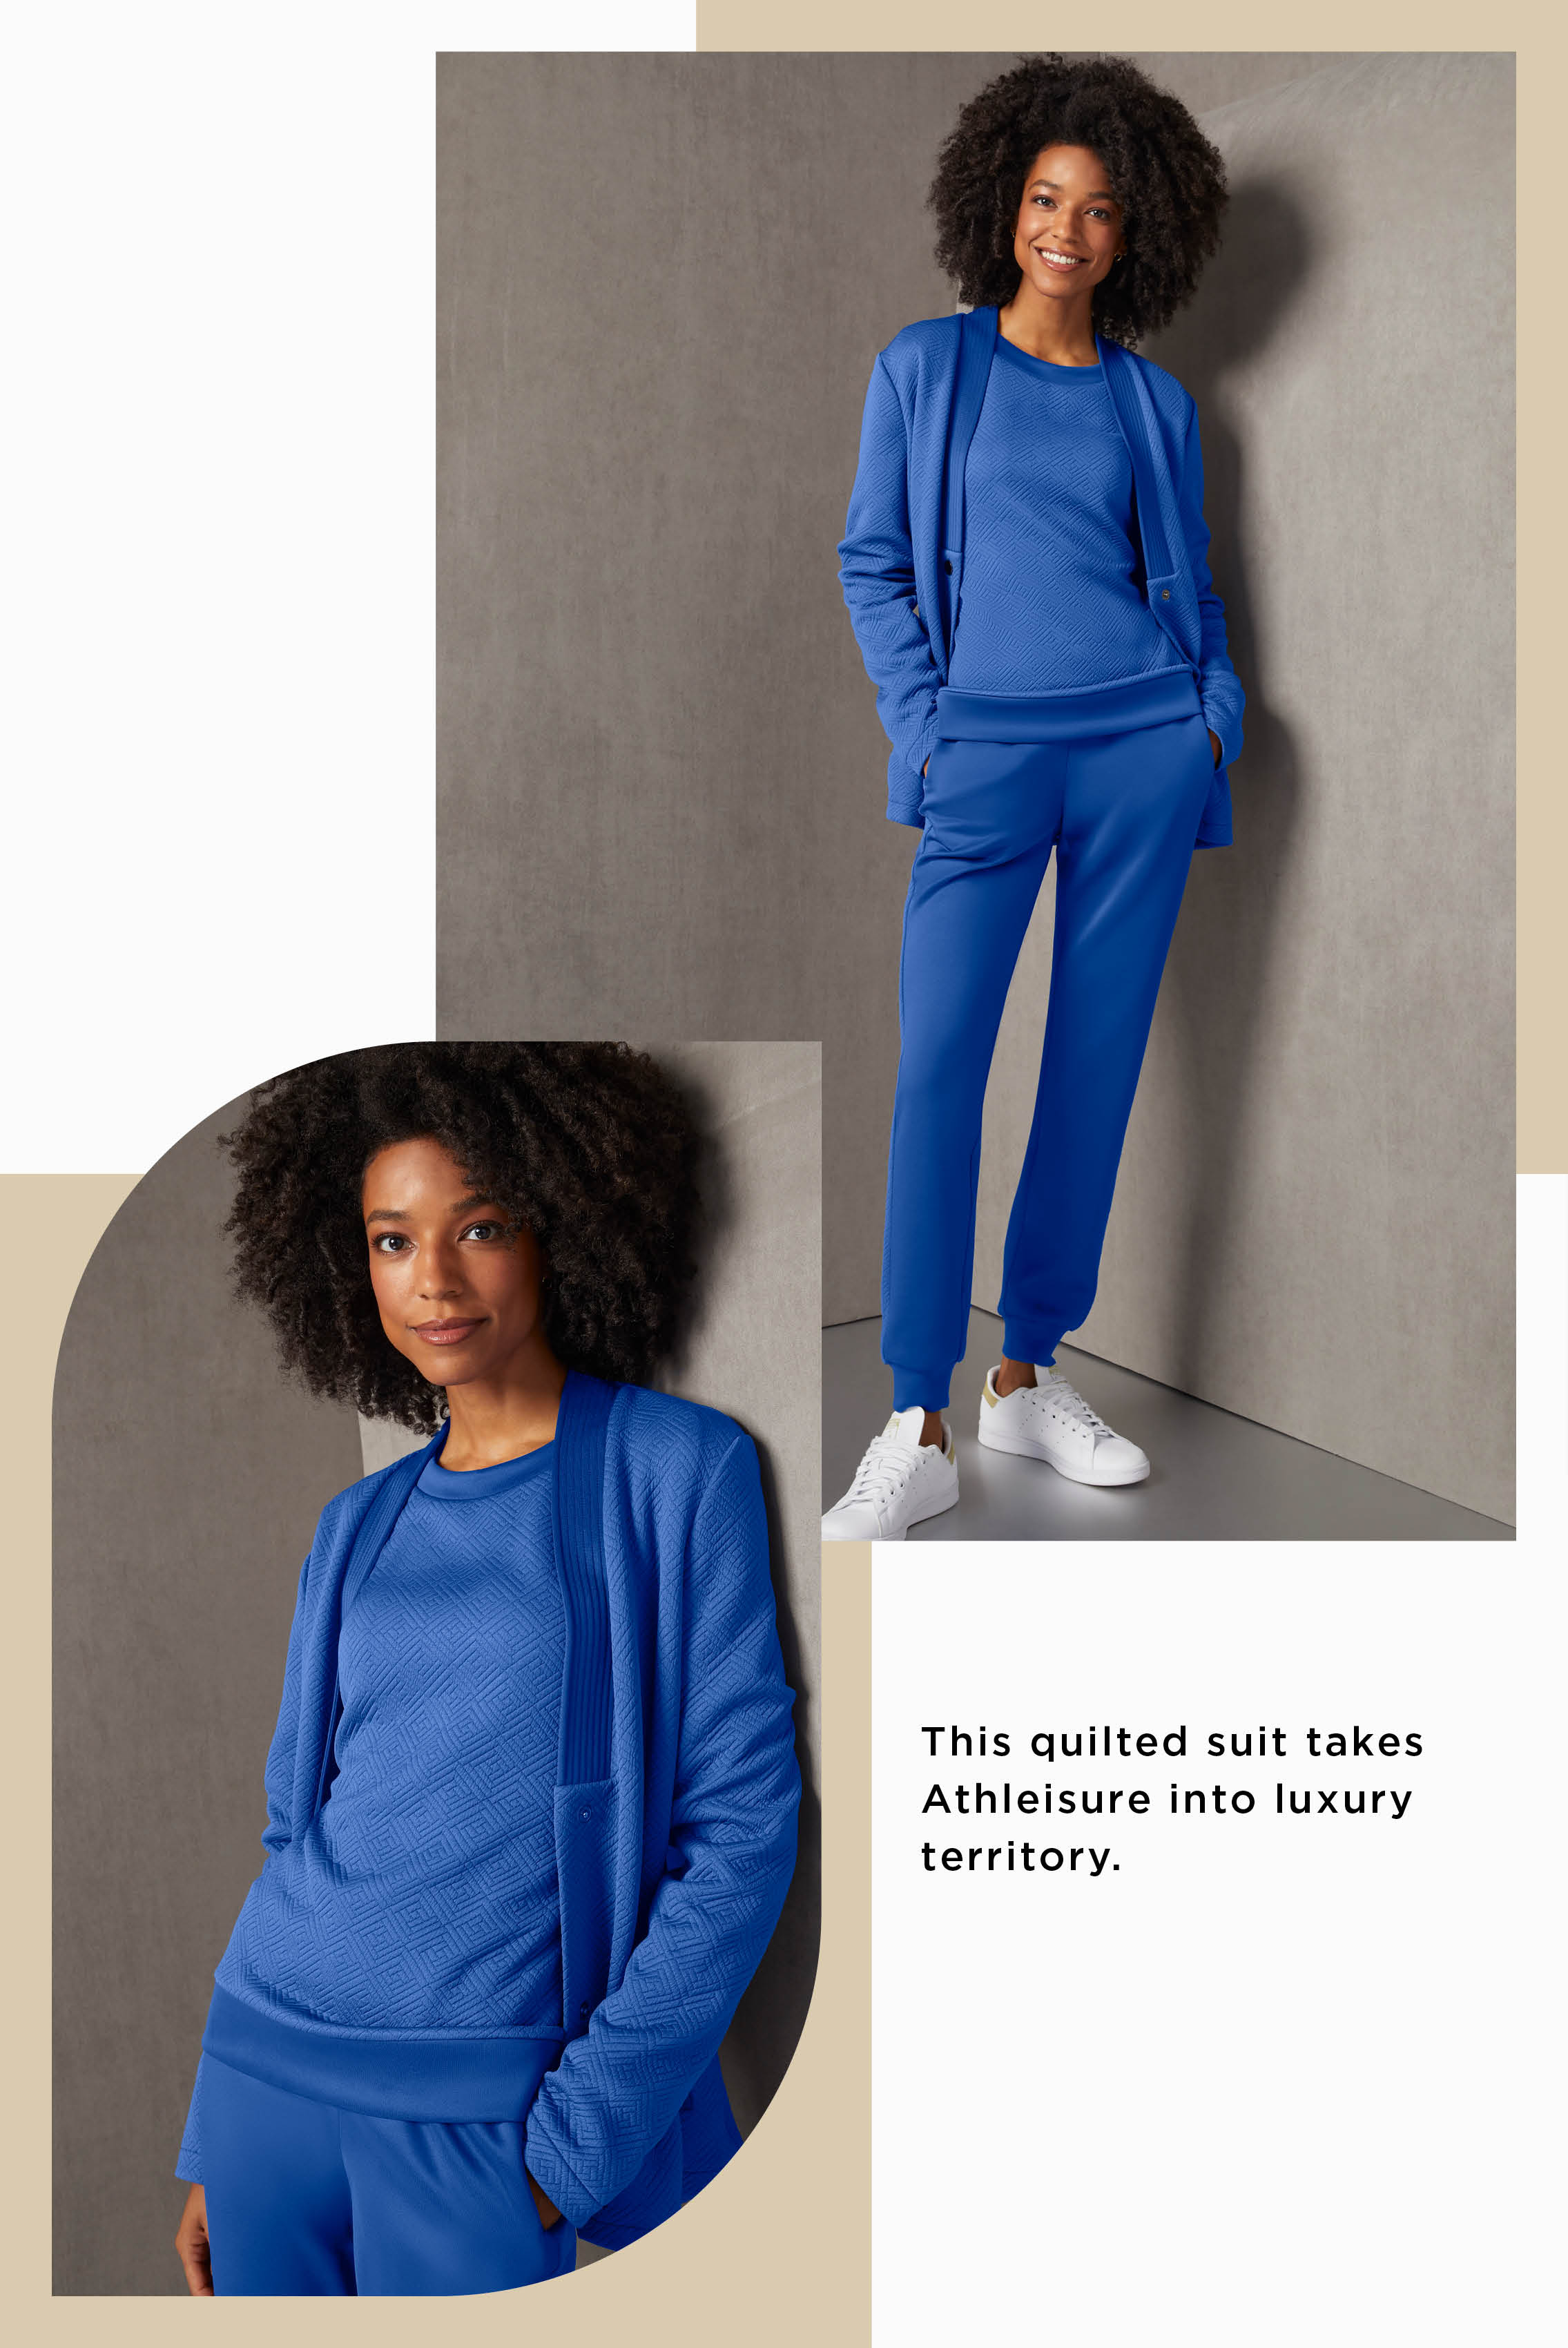 This quilted suit takes Athleisure into luxury territory. The bomber jacket, sweatshirt, and track pants feature luxurious meander quilting. The snap-front jacket has rich trapunto at the shawl collar and pocket besoms.